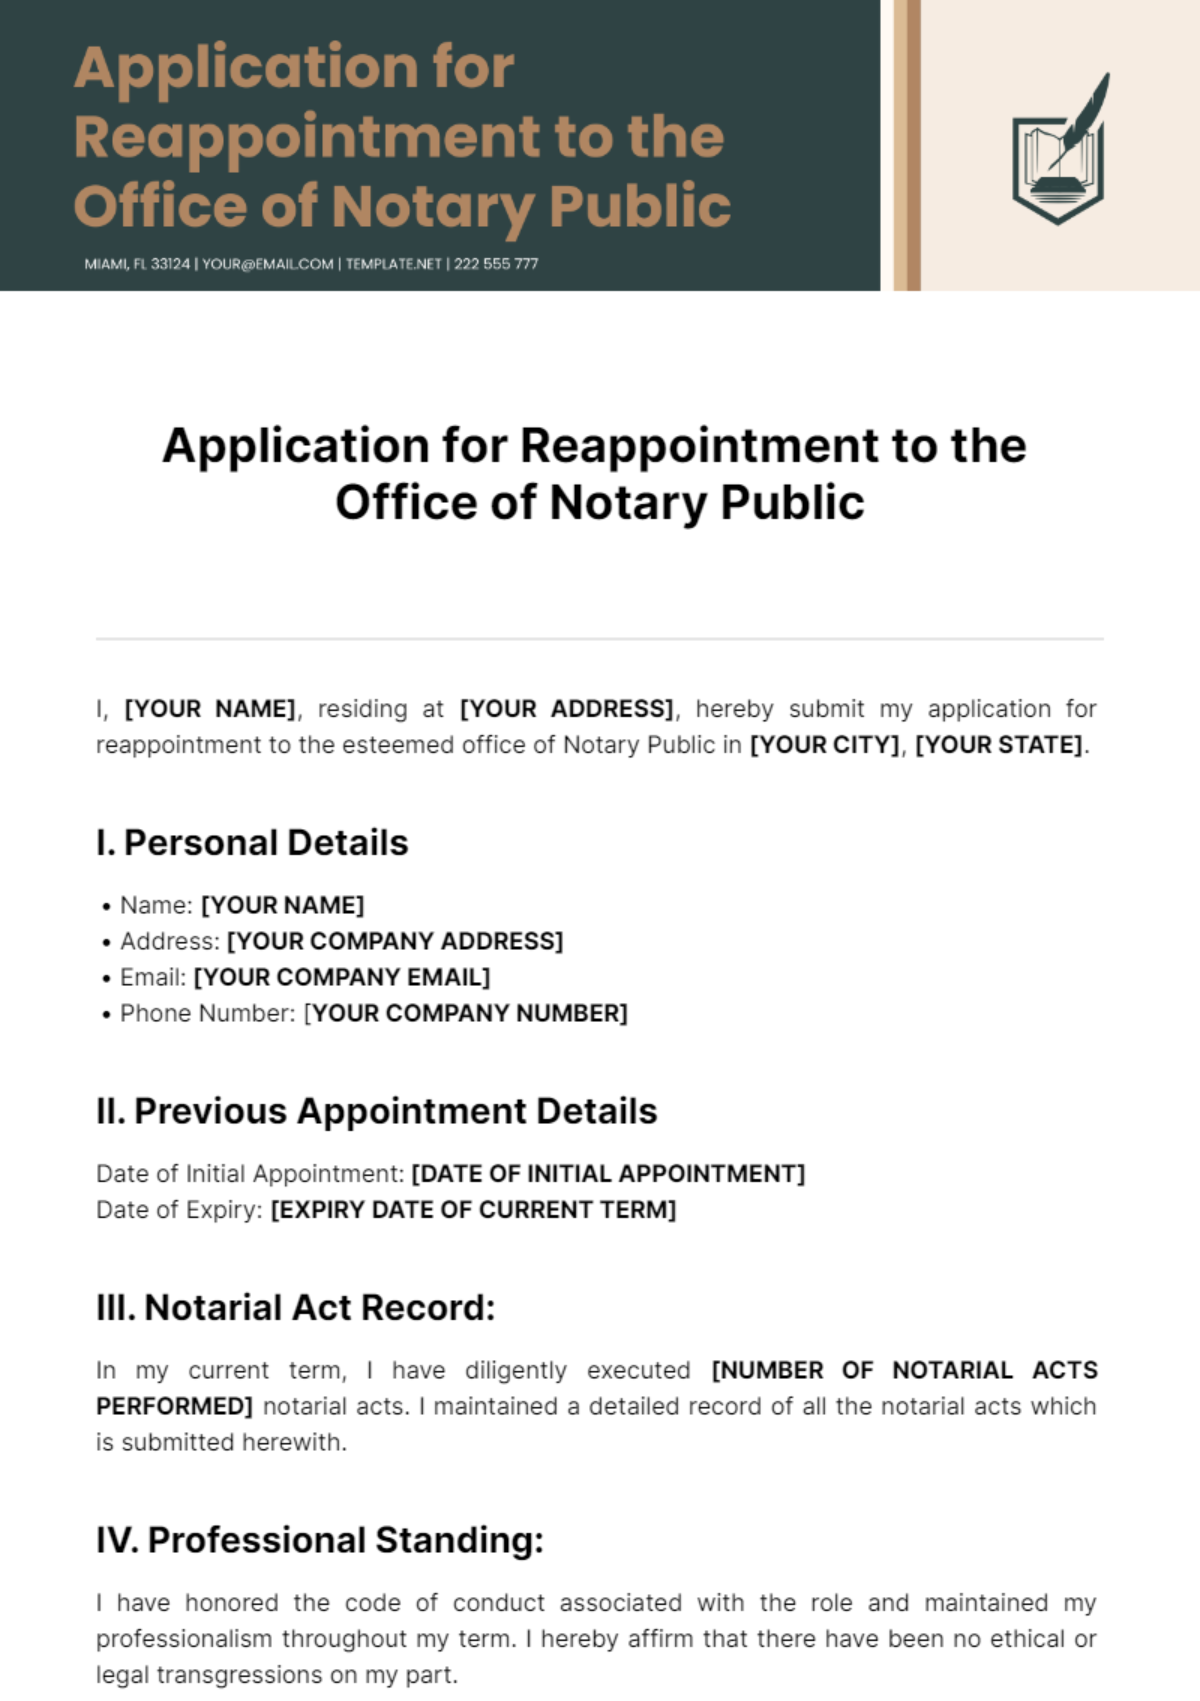 Free Application For Reappointment To Office Of Notary Public Template